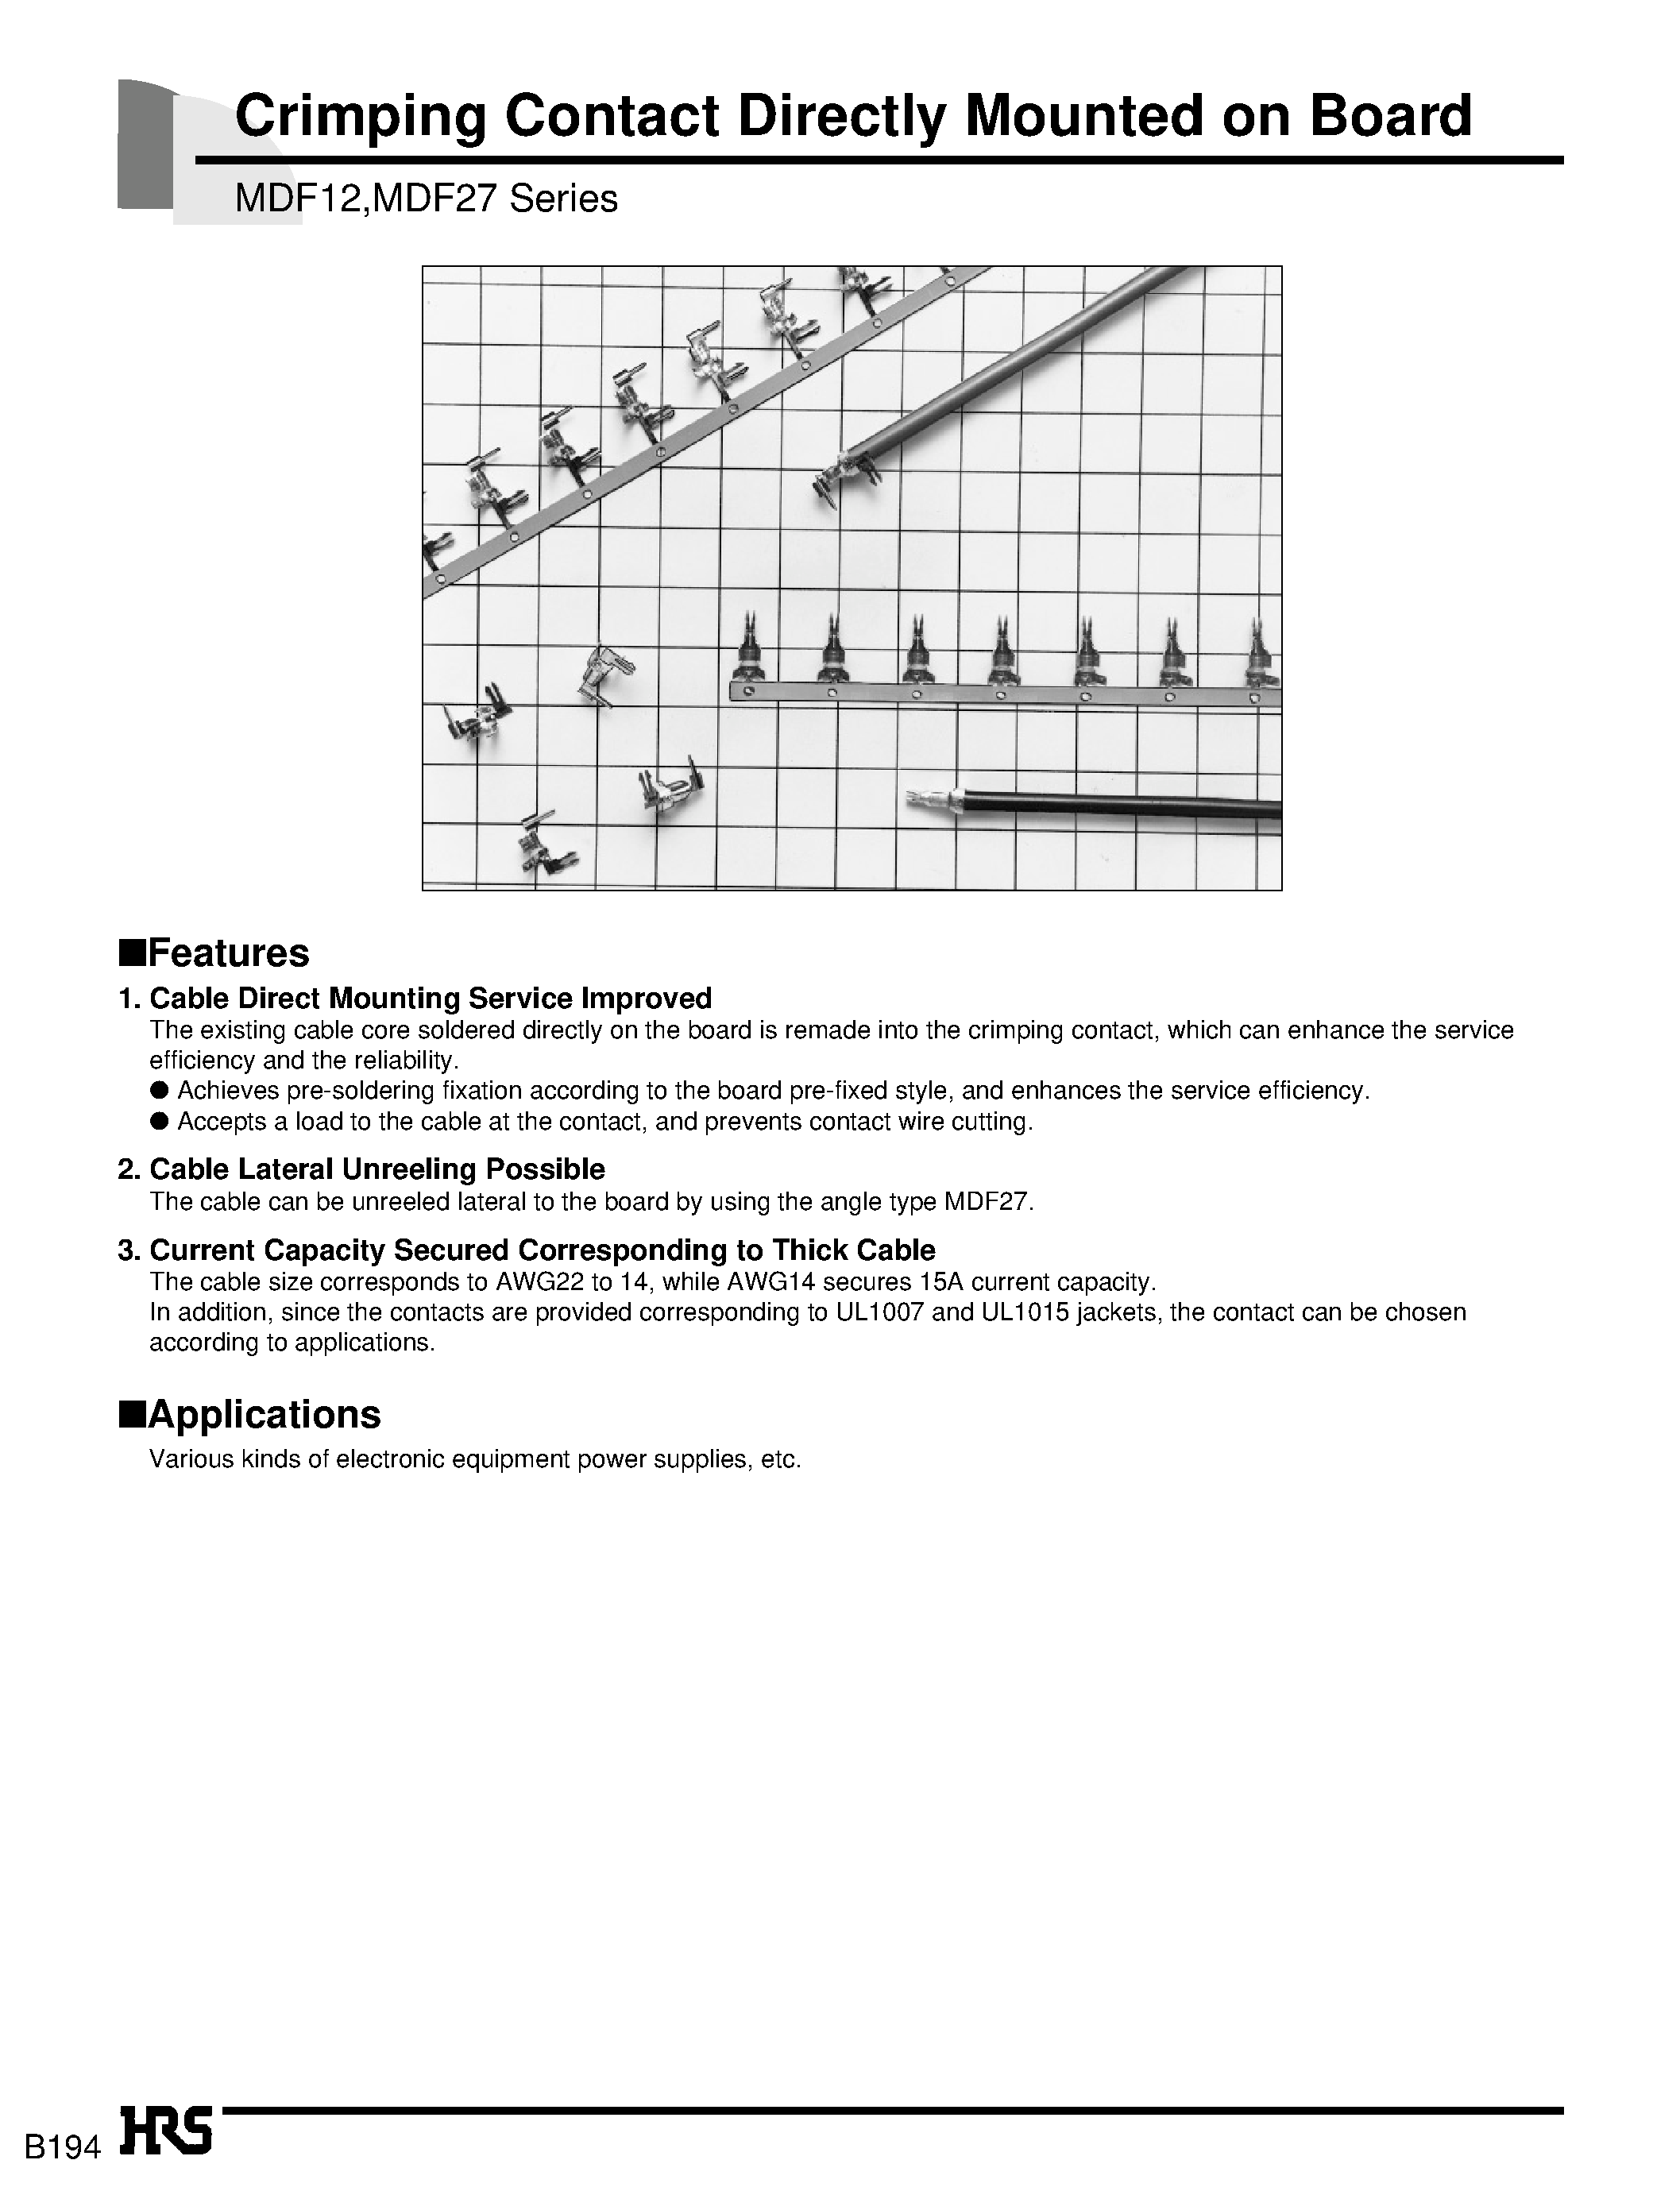 Datasheet MDF27-TA1416HC - Crimping Contact Directly Mounted on Board page 1